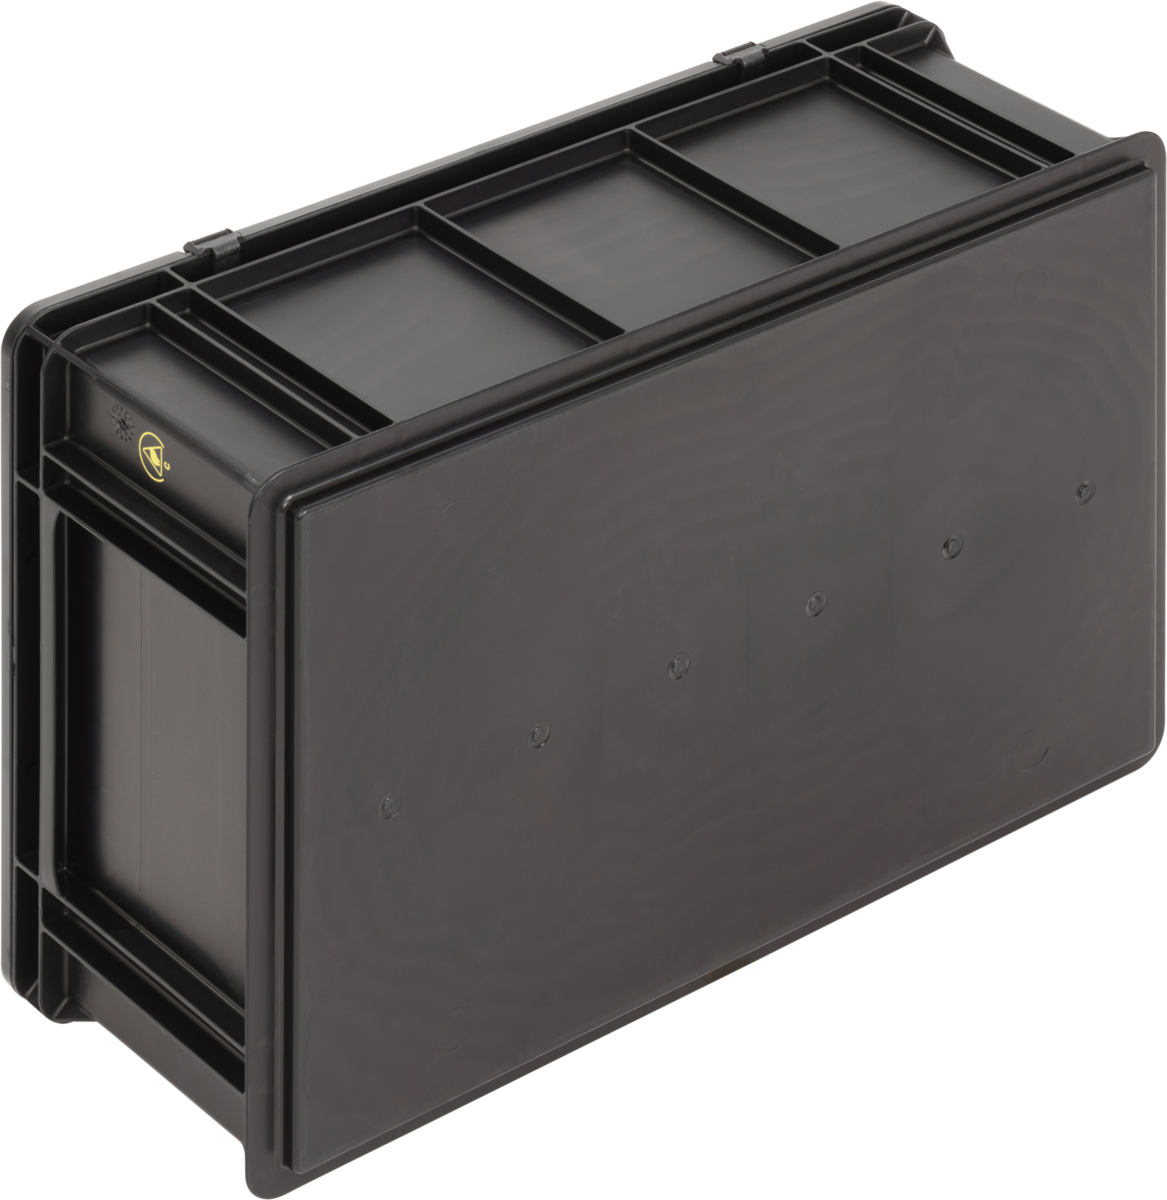 ESD-Safe-SGL-Norm-Carrying-Cases-Flat-Base-007-Ref.-6420.397.992_1004501_600x400x221_02